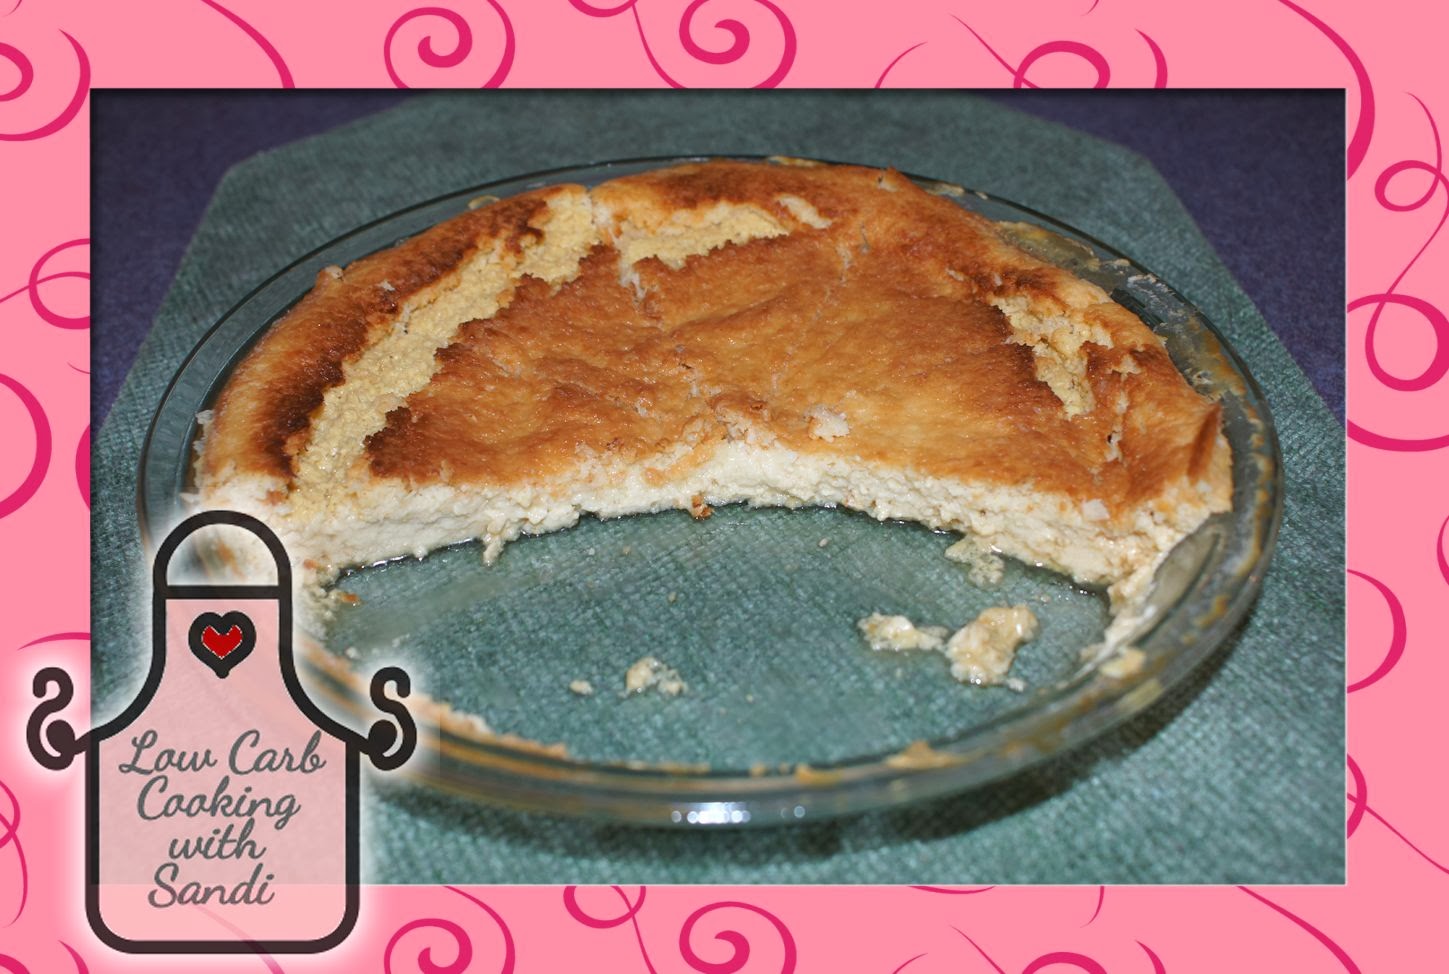 Thumbnail for “Not So Impossible” Coconut Pie